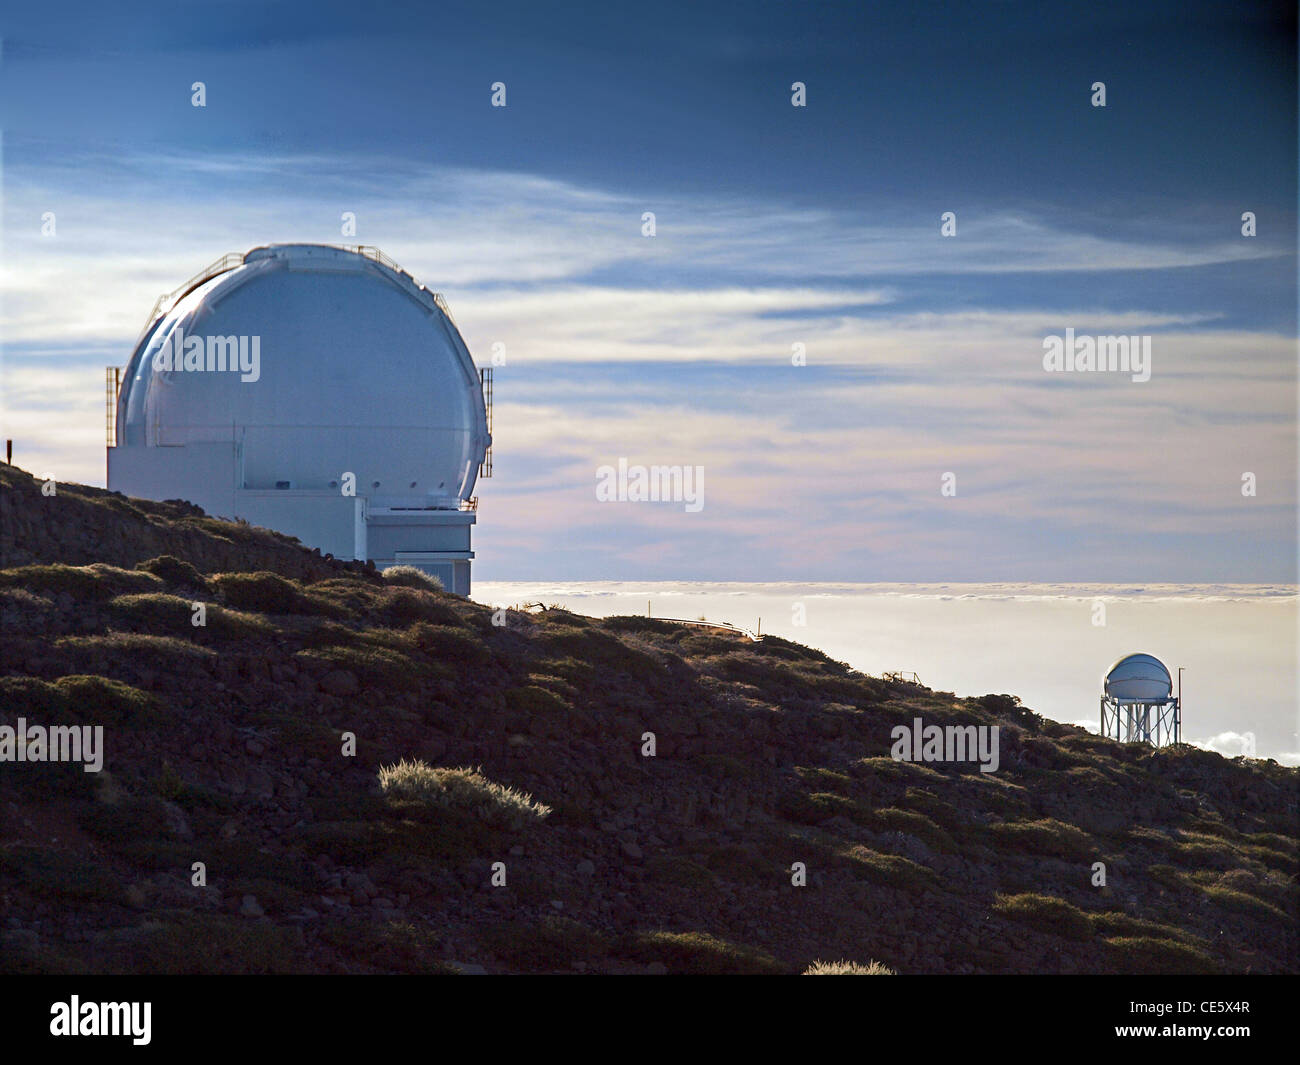 The Roques de los Muchachos Observatory on La Palma, Canary Islands Stock Photo